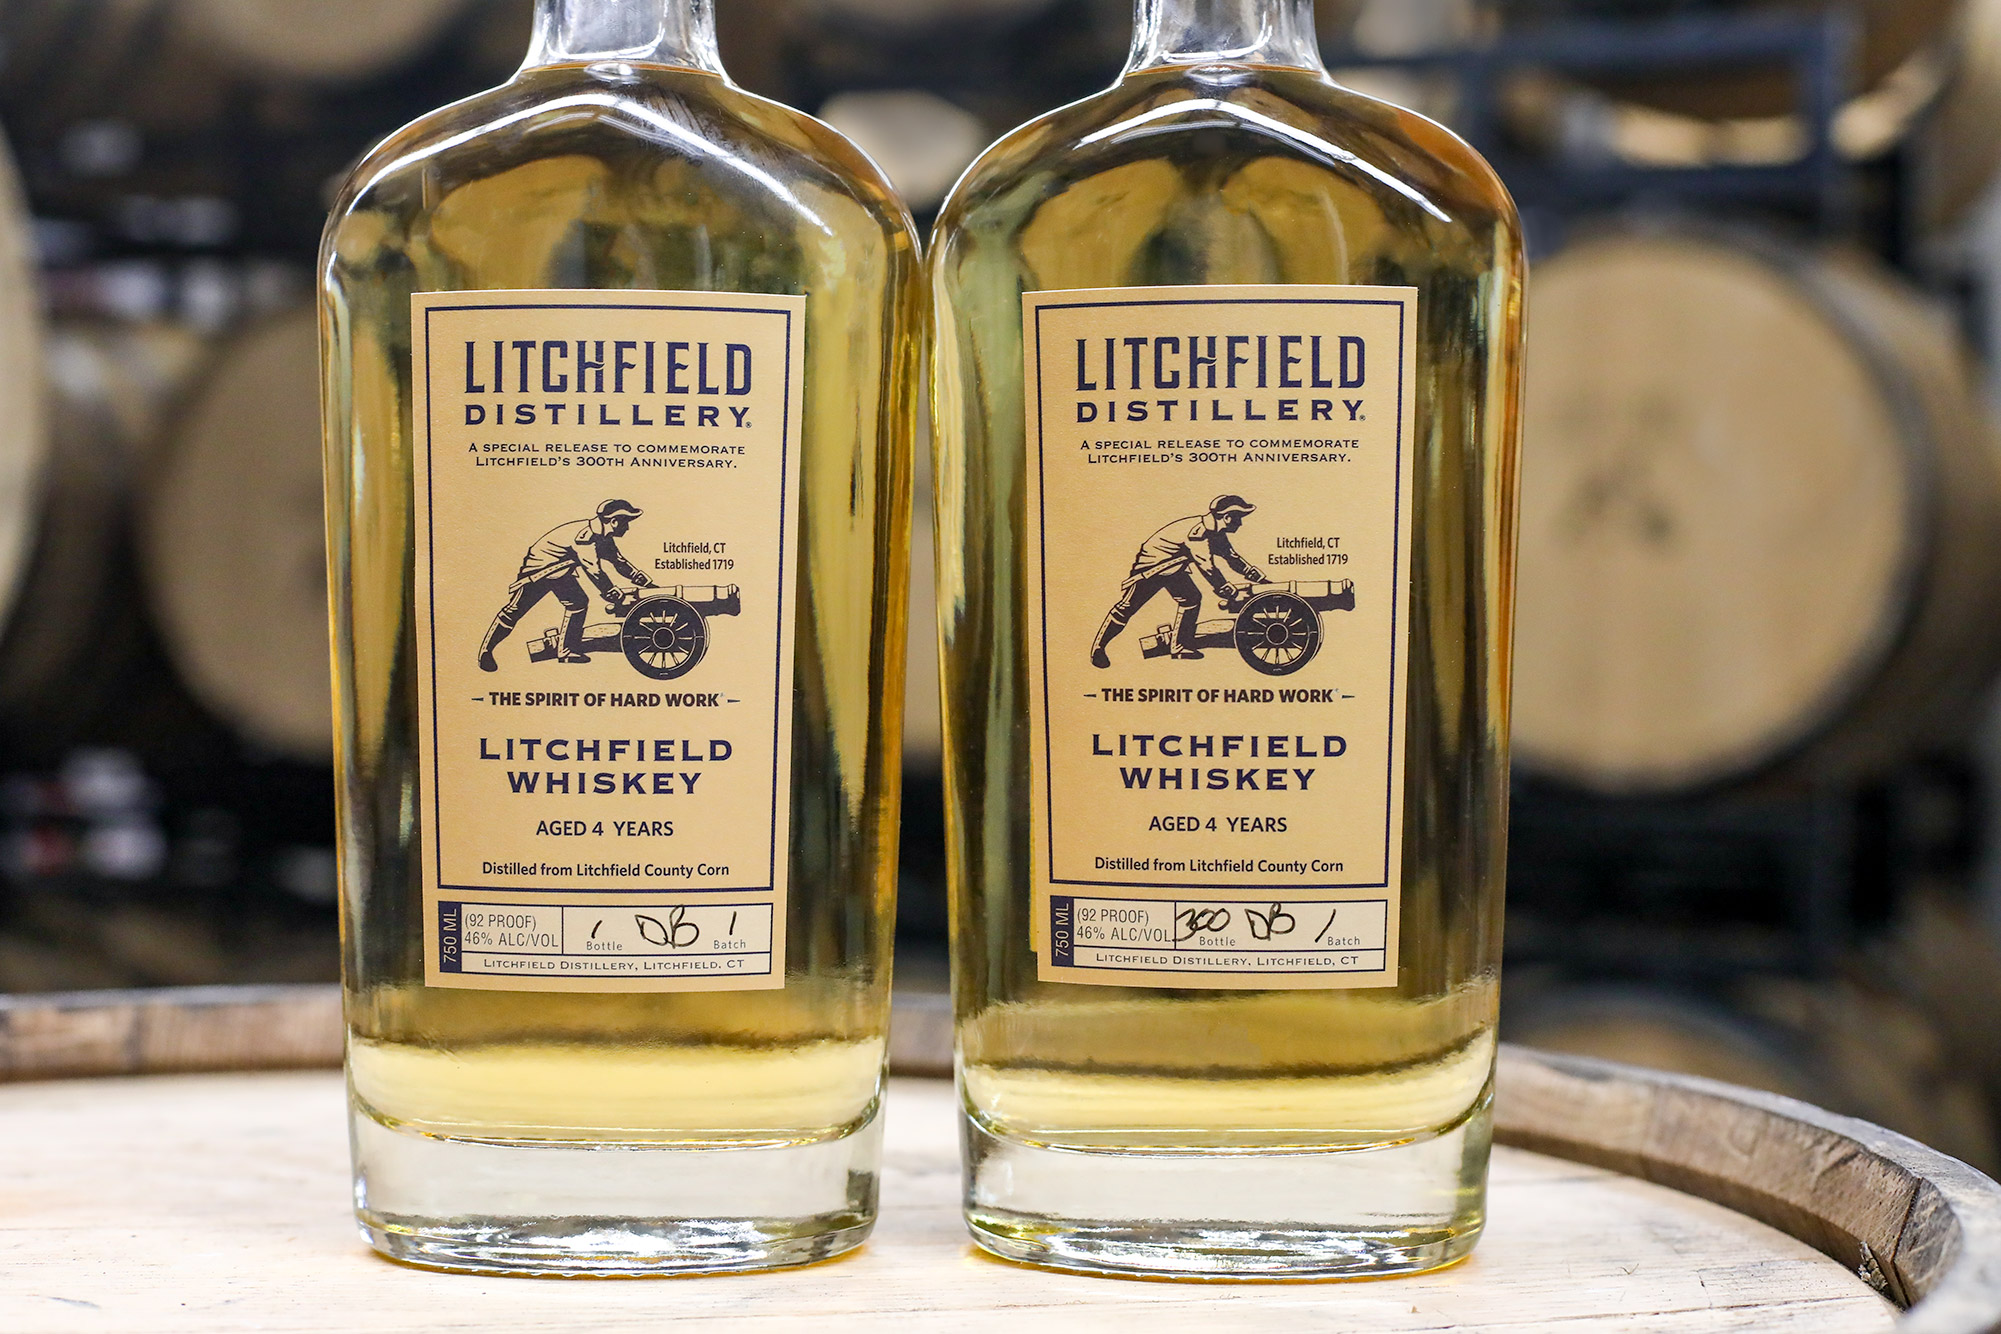 A limited run of 300 bottles to celebrate Litchfield, Connecticut's 300th Anniversary.